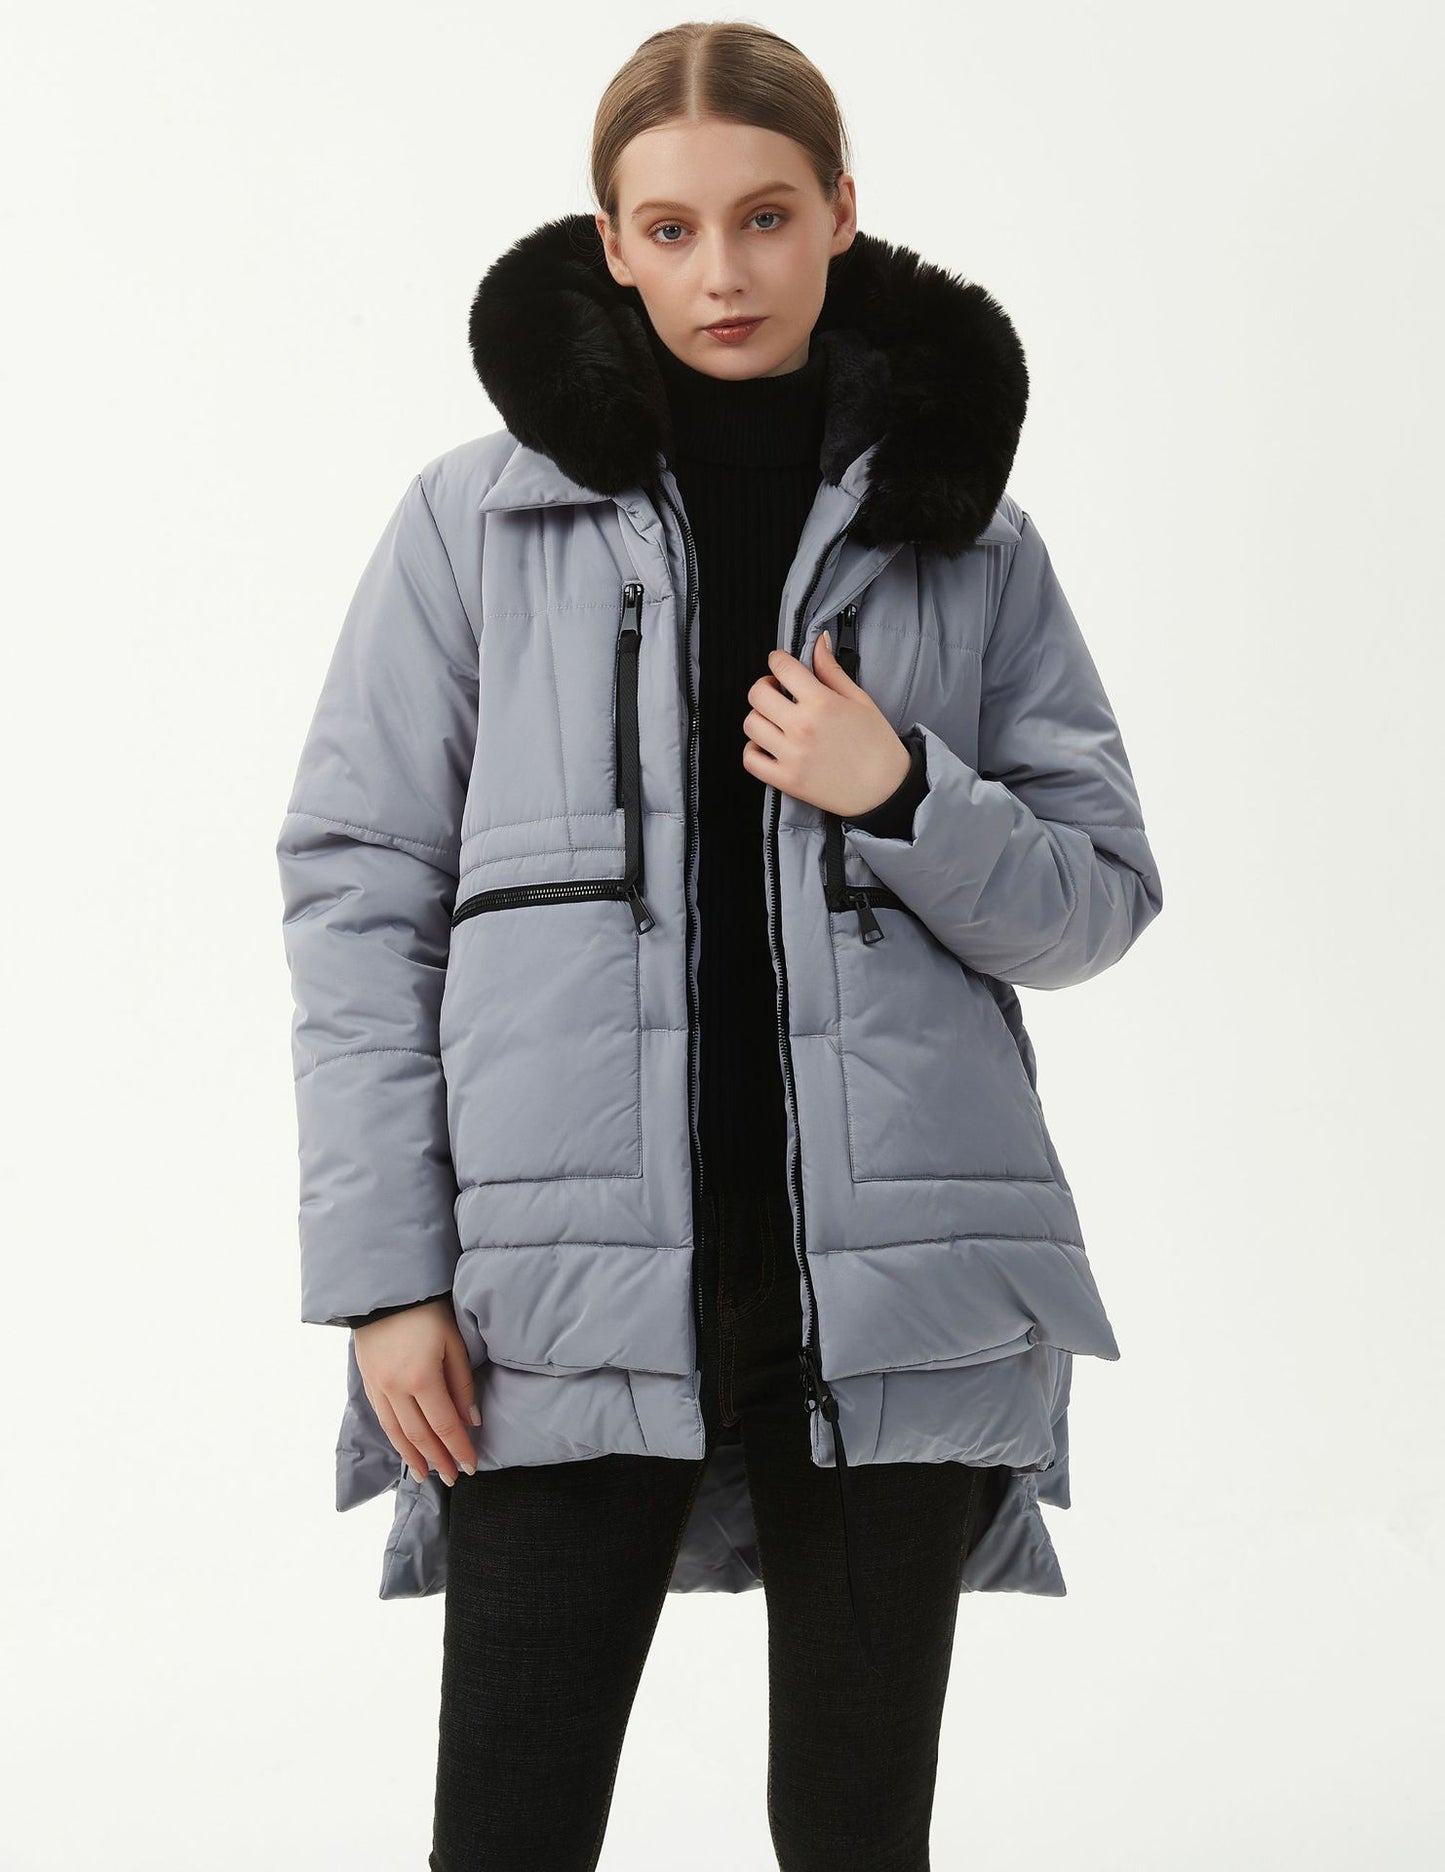 jackets  | Women's Casual Hooded Middle Long Cotton-padded Coat | Light Gray |  L| thecurvestory.myshopify.com